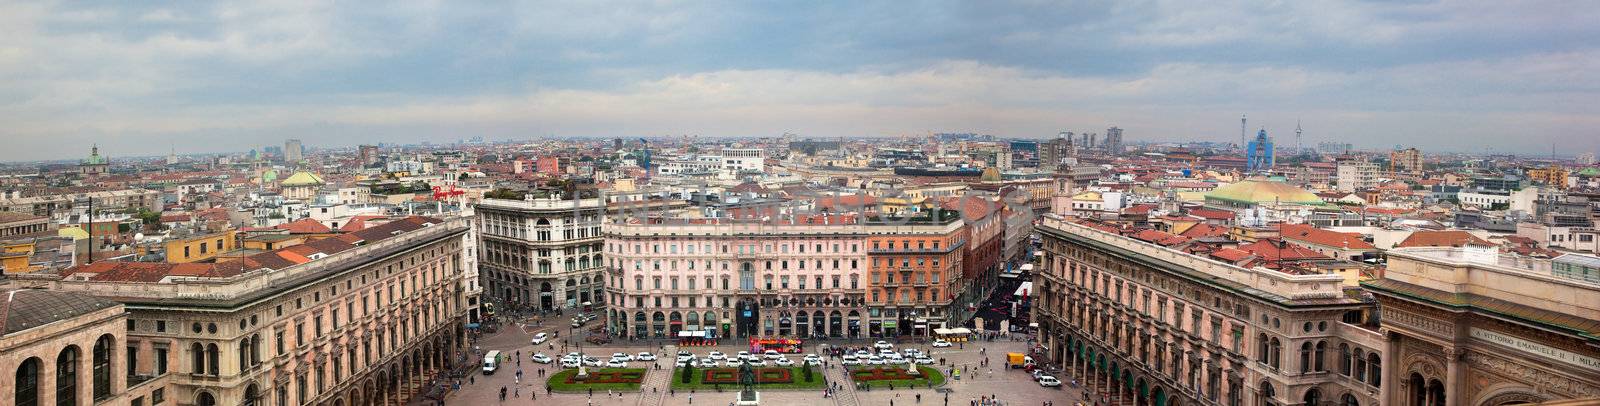 Milan, Italy panorama. View from Milan Cathedral on Piazza del Duomo.